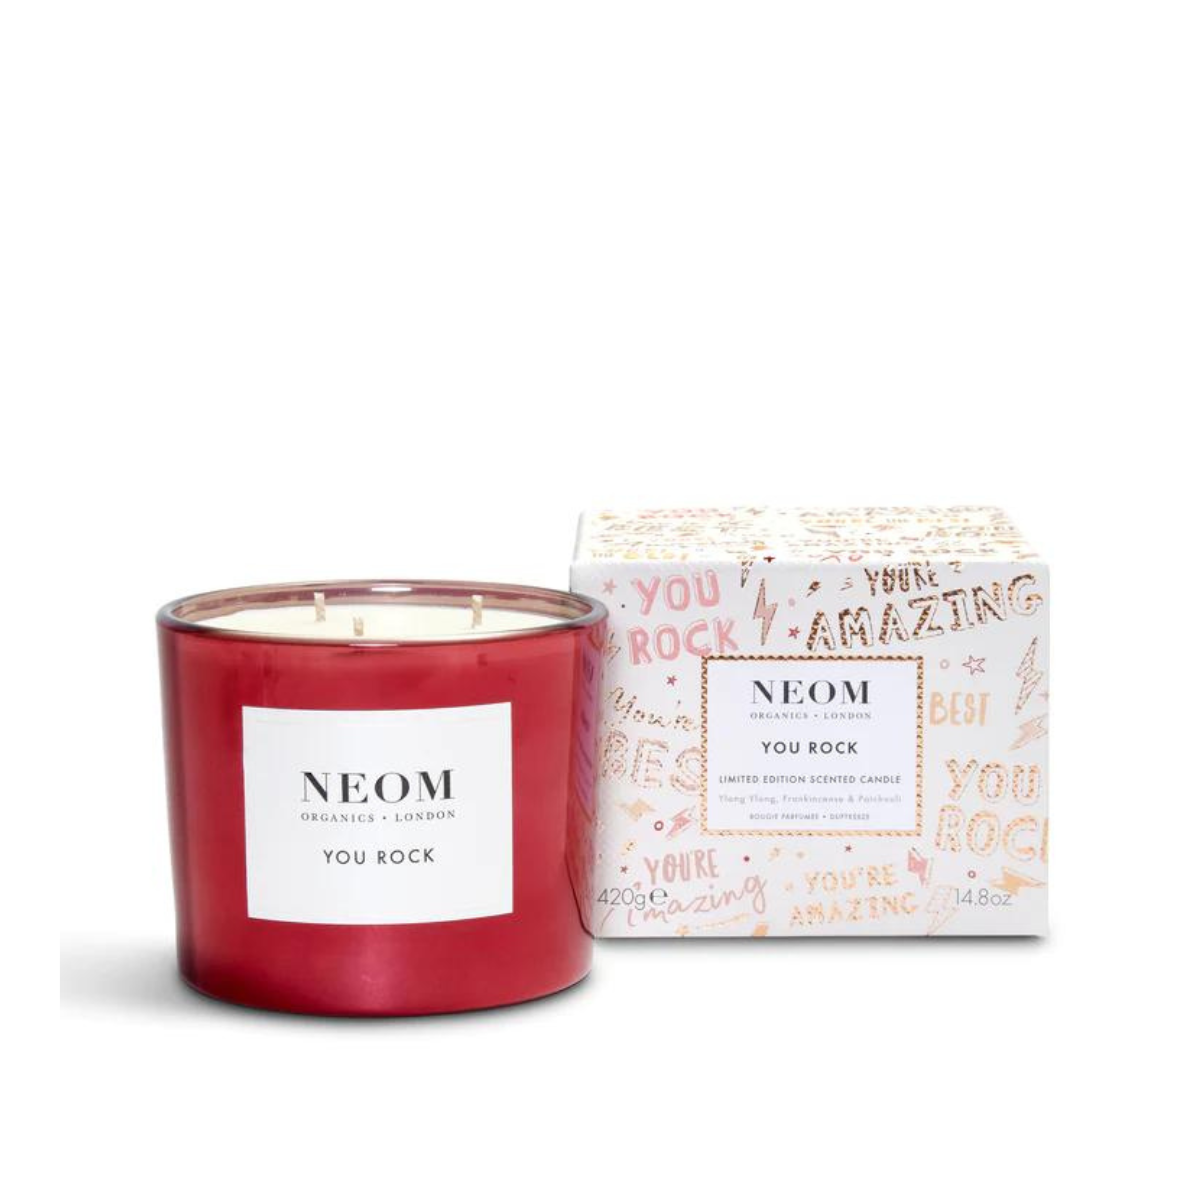 Neom You Rock Limited Edition Scented Candle (3 wick)